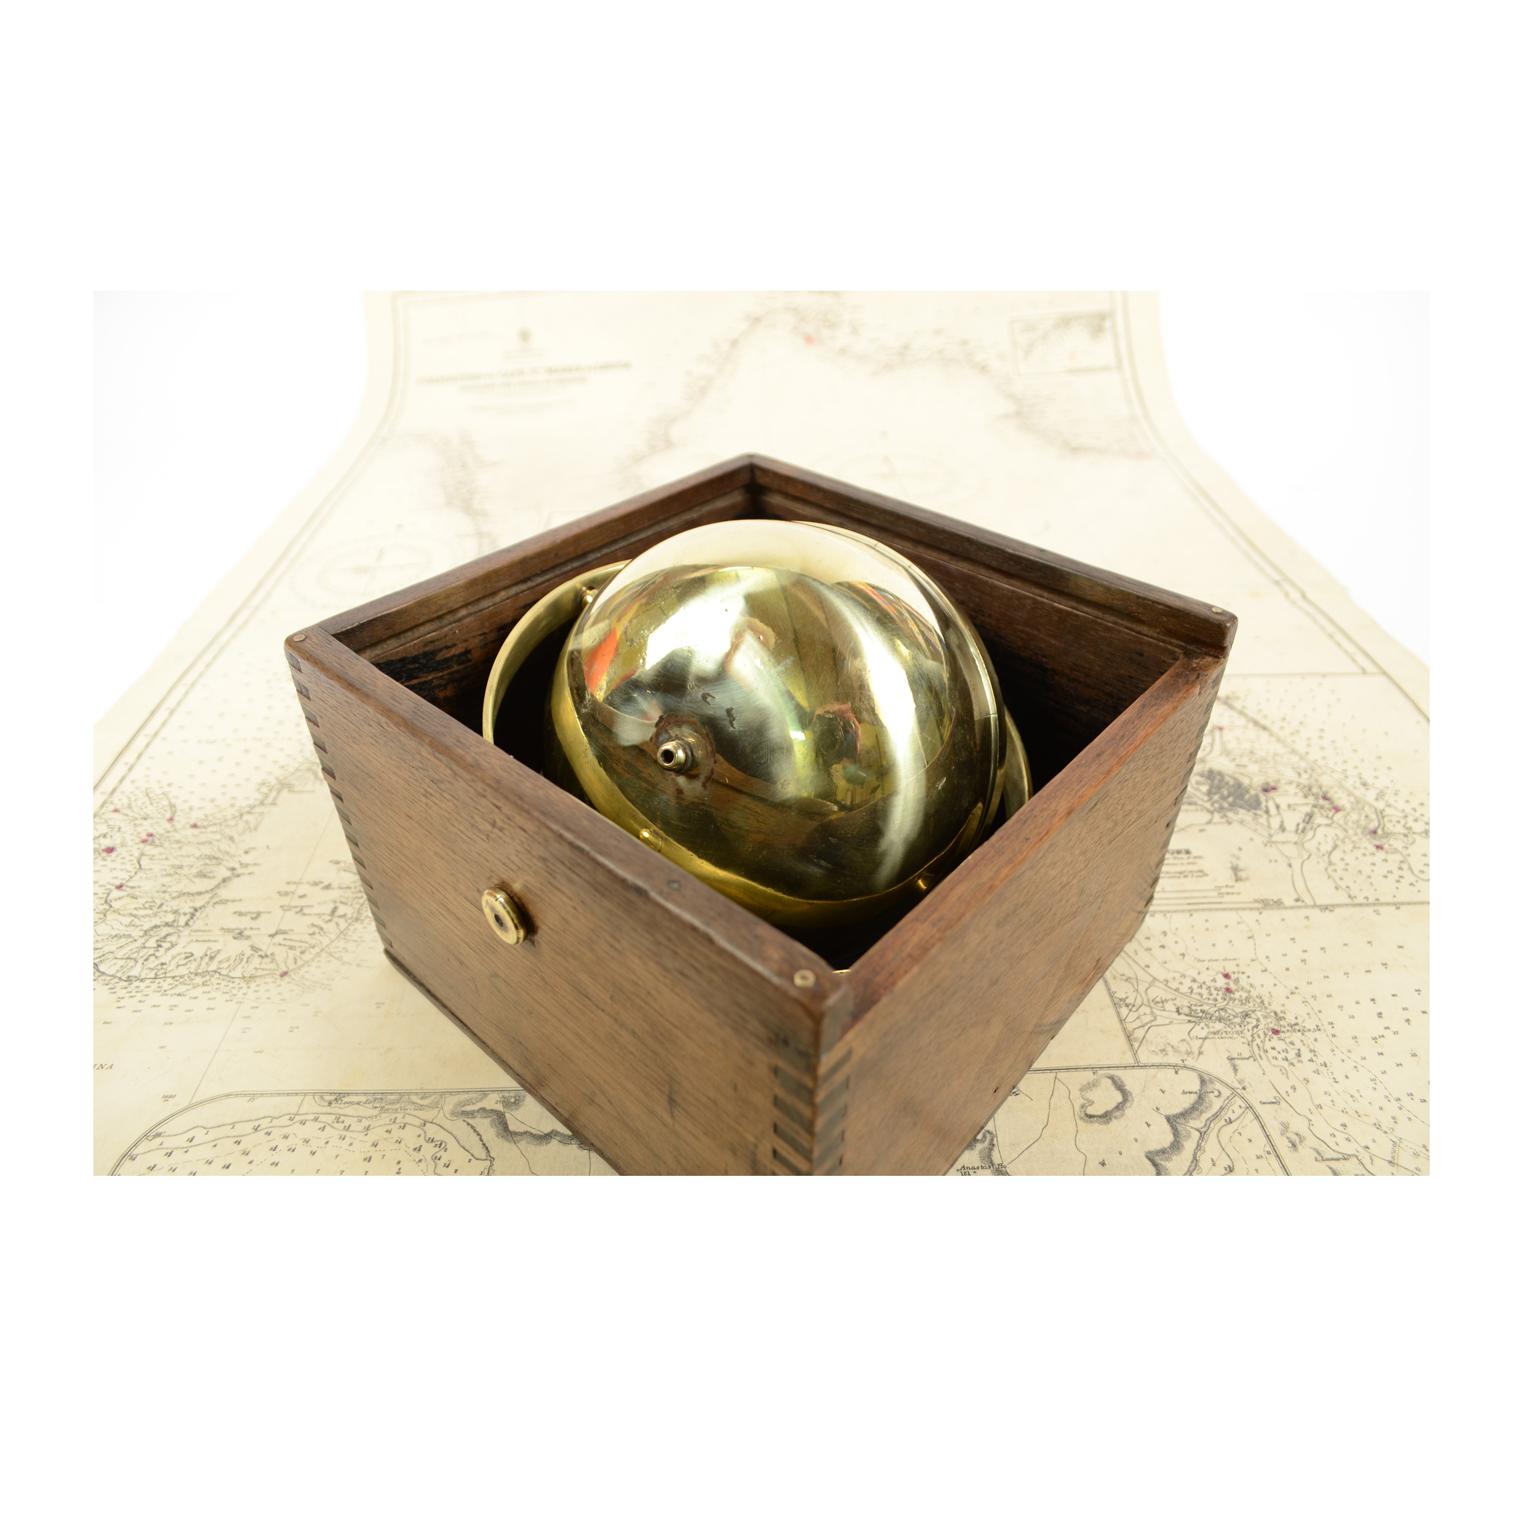 Mid-20th Century Compass Lilley & Reynolds Ltd London Made in 1930s in Its Original Wooden Box